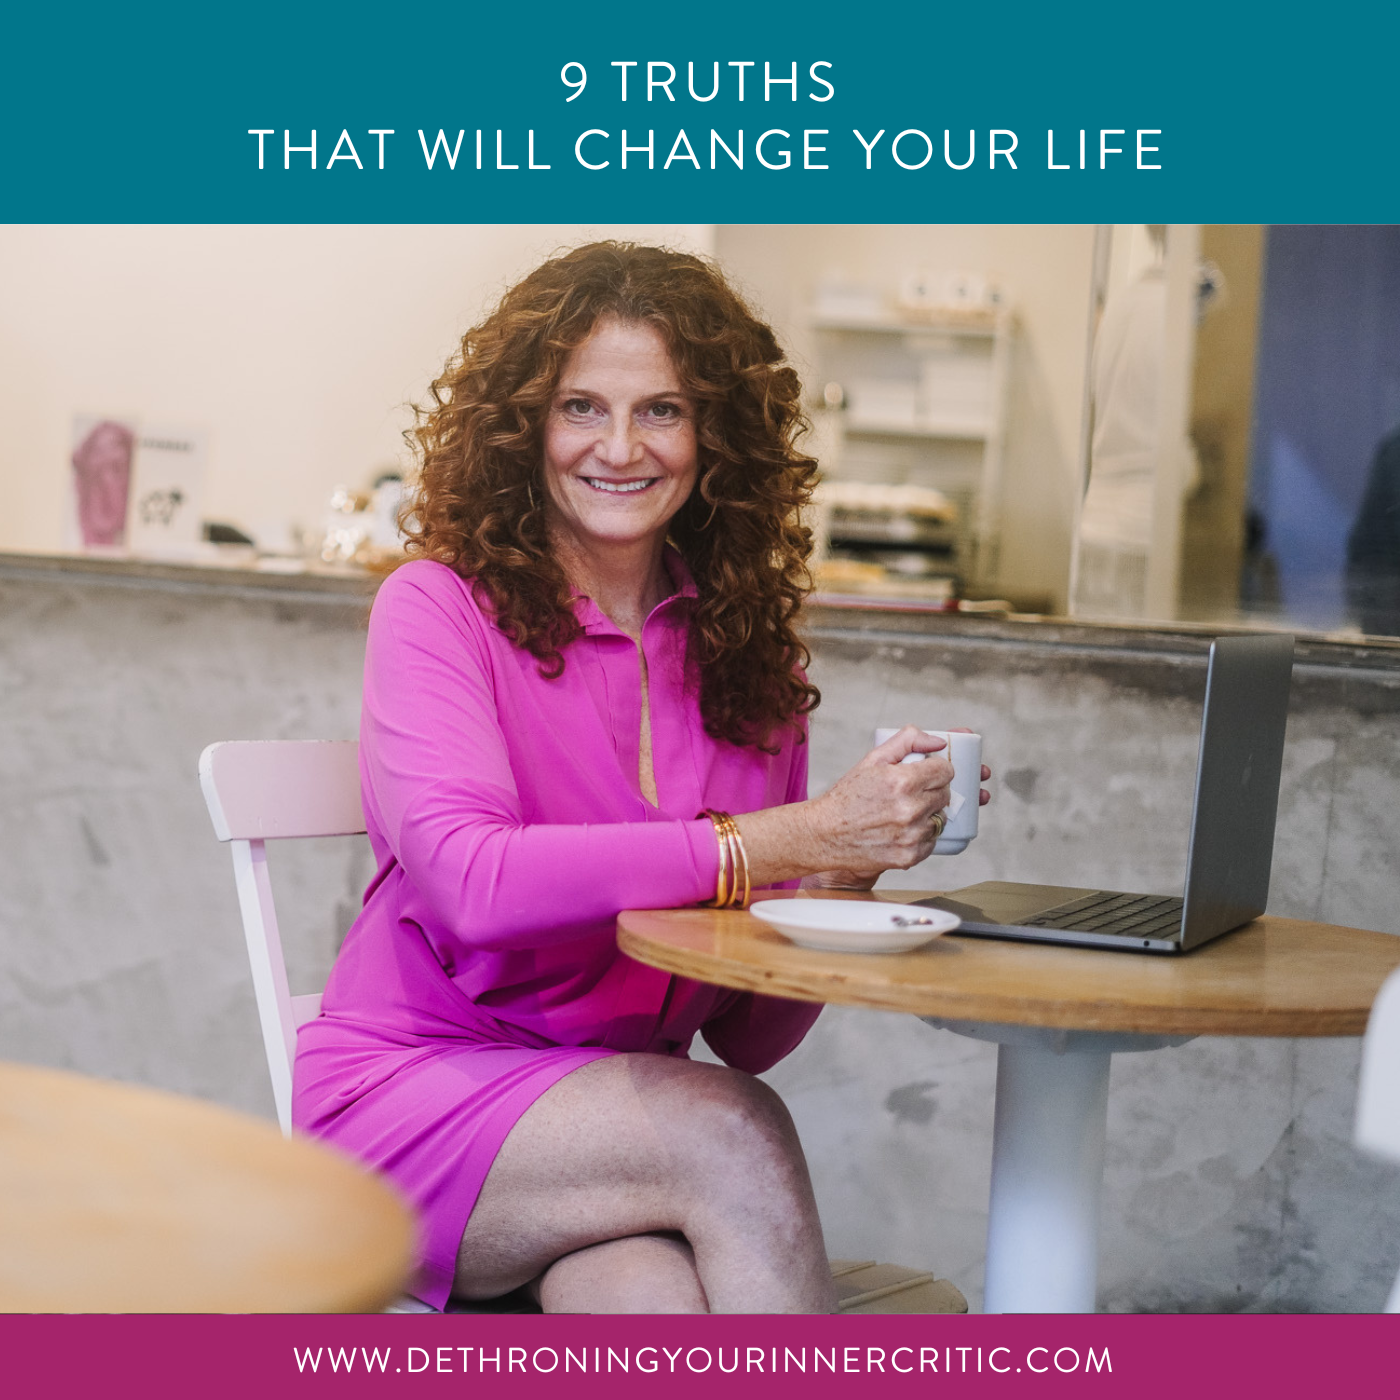 9 Truths That Will Change Your Life